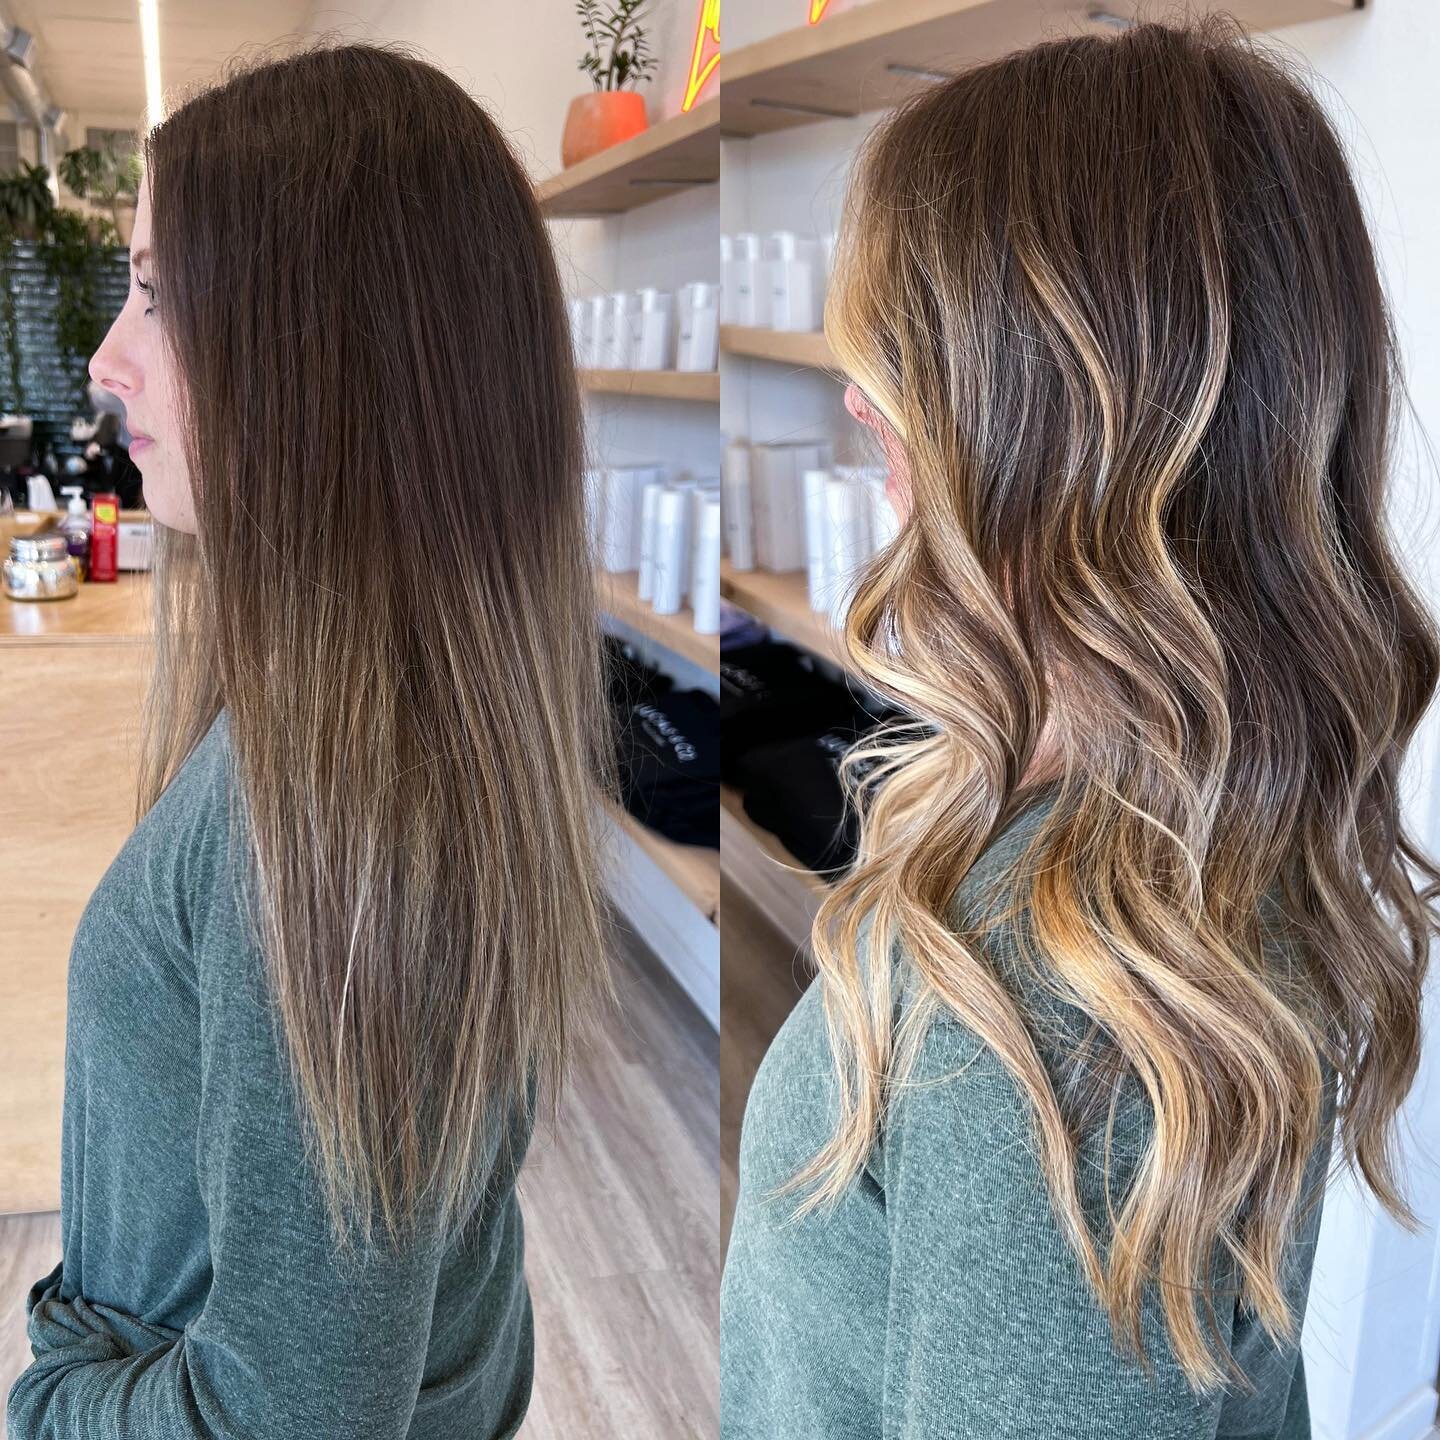 &quot;From drab to fab! 💁&zwj;♀️ It's been over a year since this beauty has had her hair done, and she was in desperate need of a refresh. So, we opted for a low-maintenance balayage to brighten up her locks and give her the longevity she needs to 